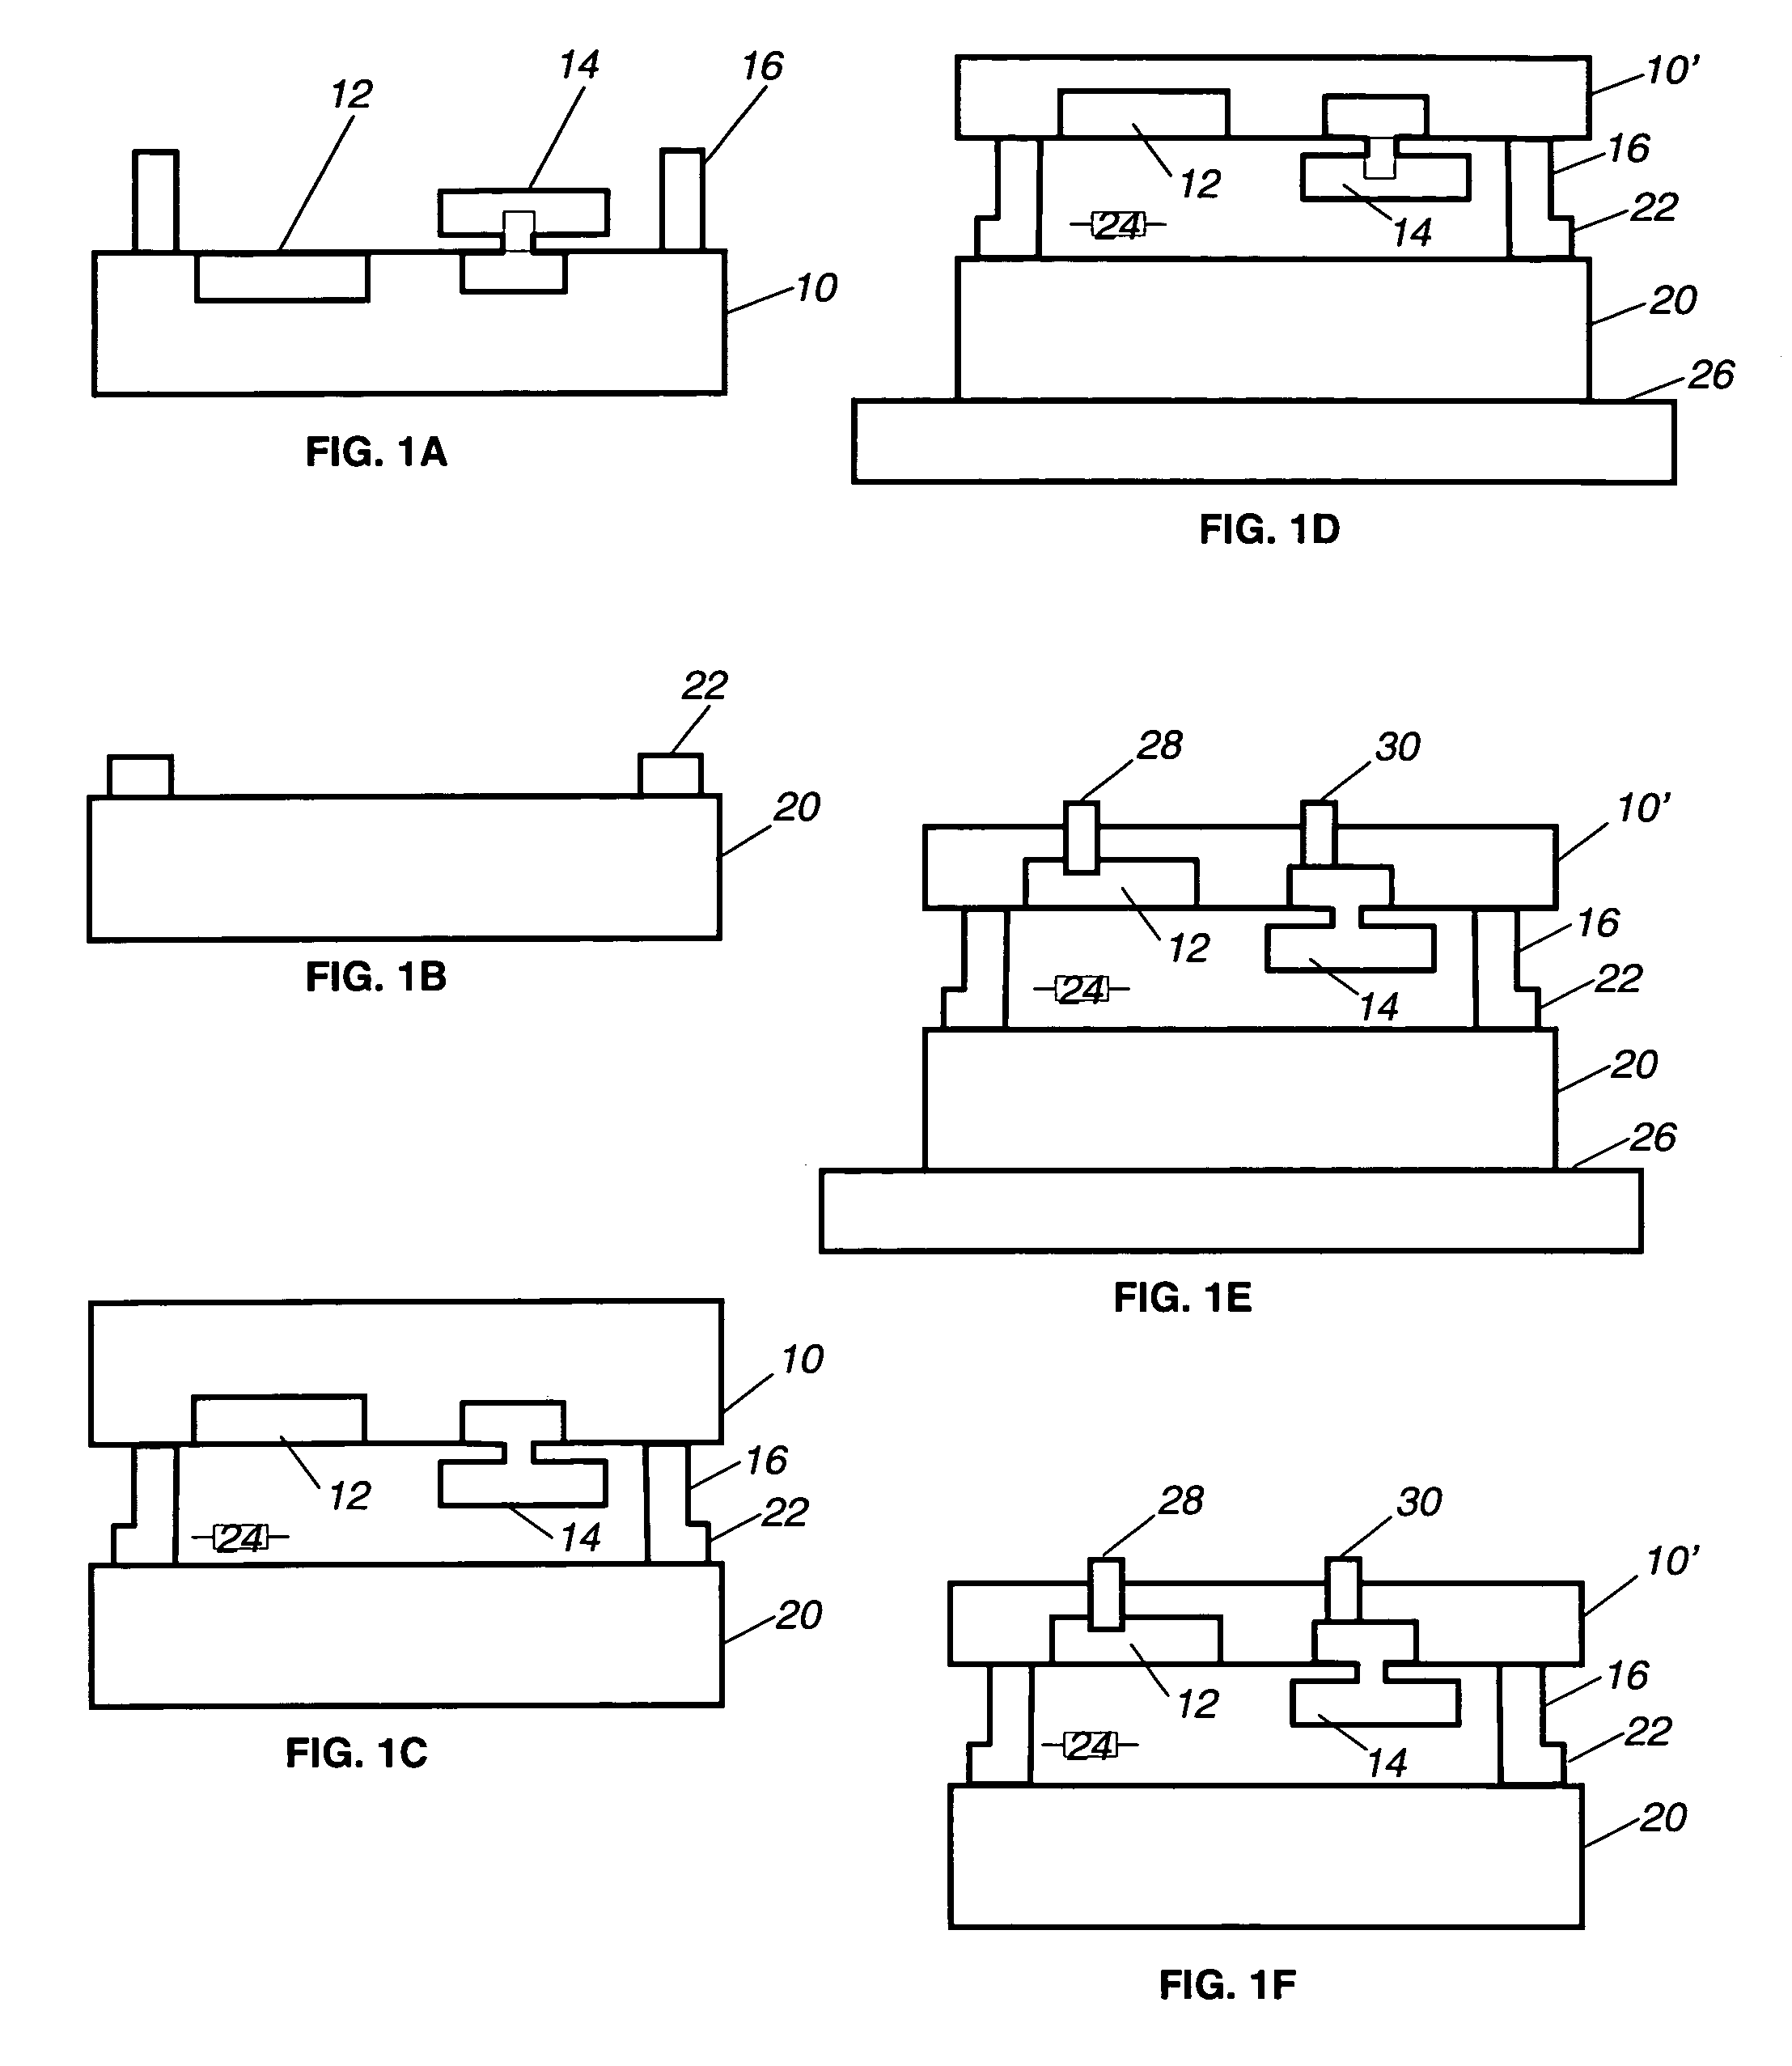 Method of fabricating high yield wafer level packages integrating MMIC and MEMS components